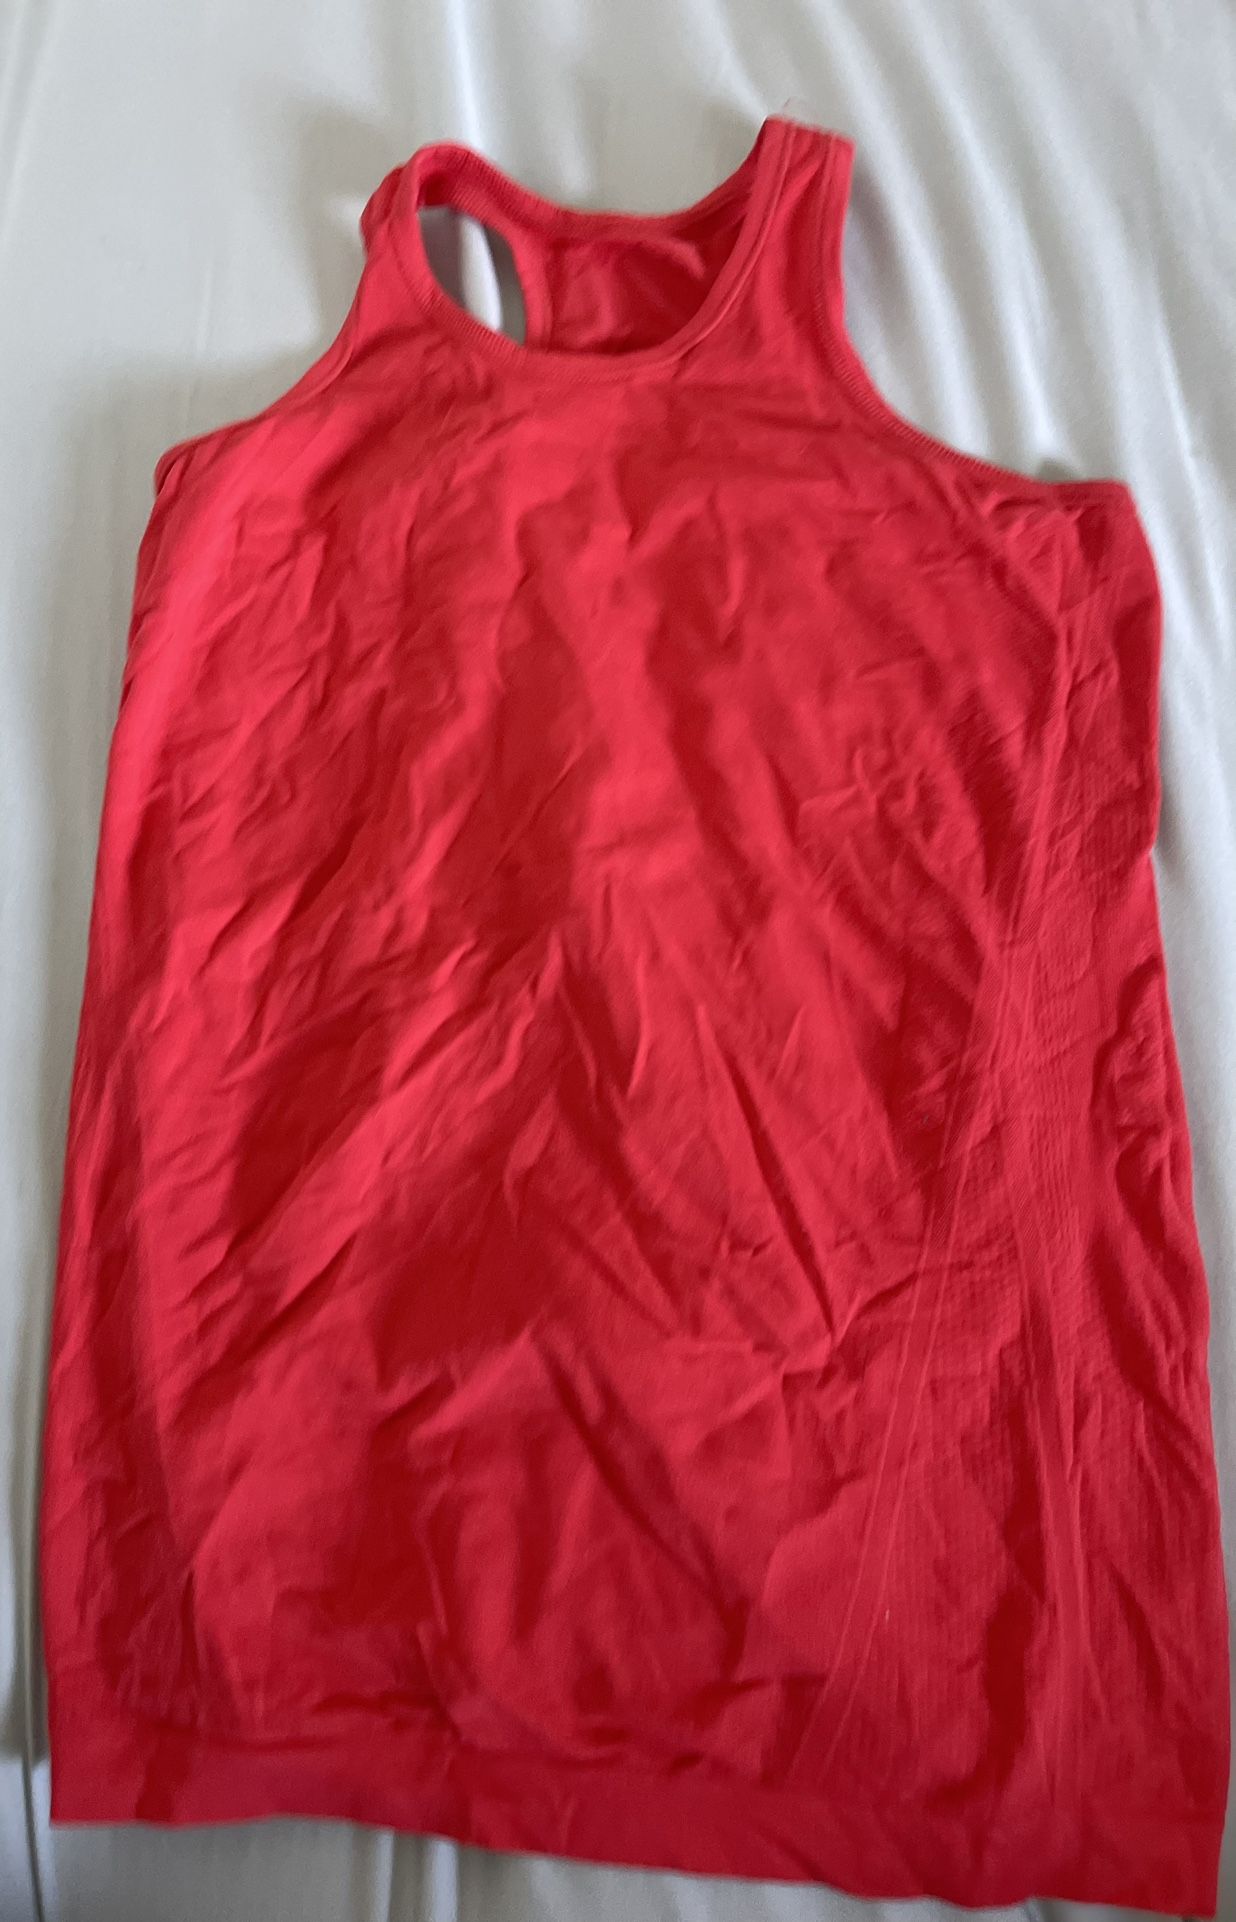 5 Athleta girl items size Xl/14 (jacket) And The Tanks And T-Shirts Are Size Xxl/16